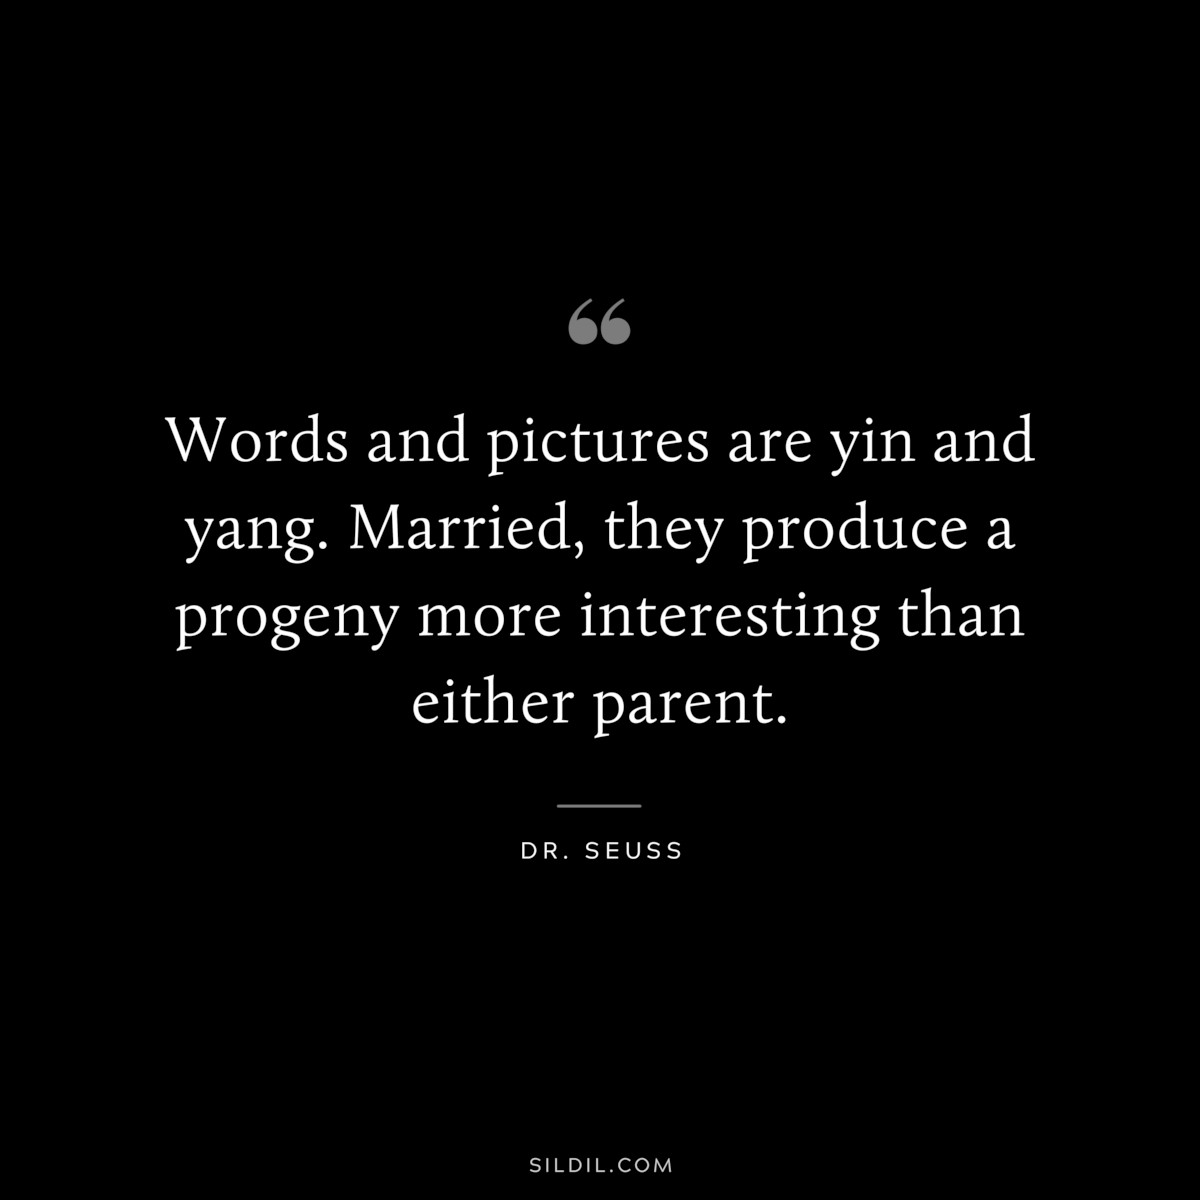 Words and pictures are yin and yang. Married, they produce a progeny more interesting than either parent. ― Dr. Seuss